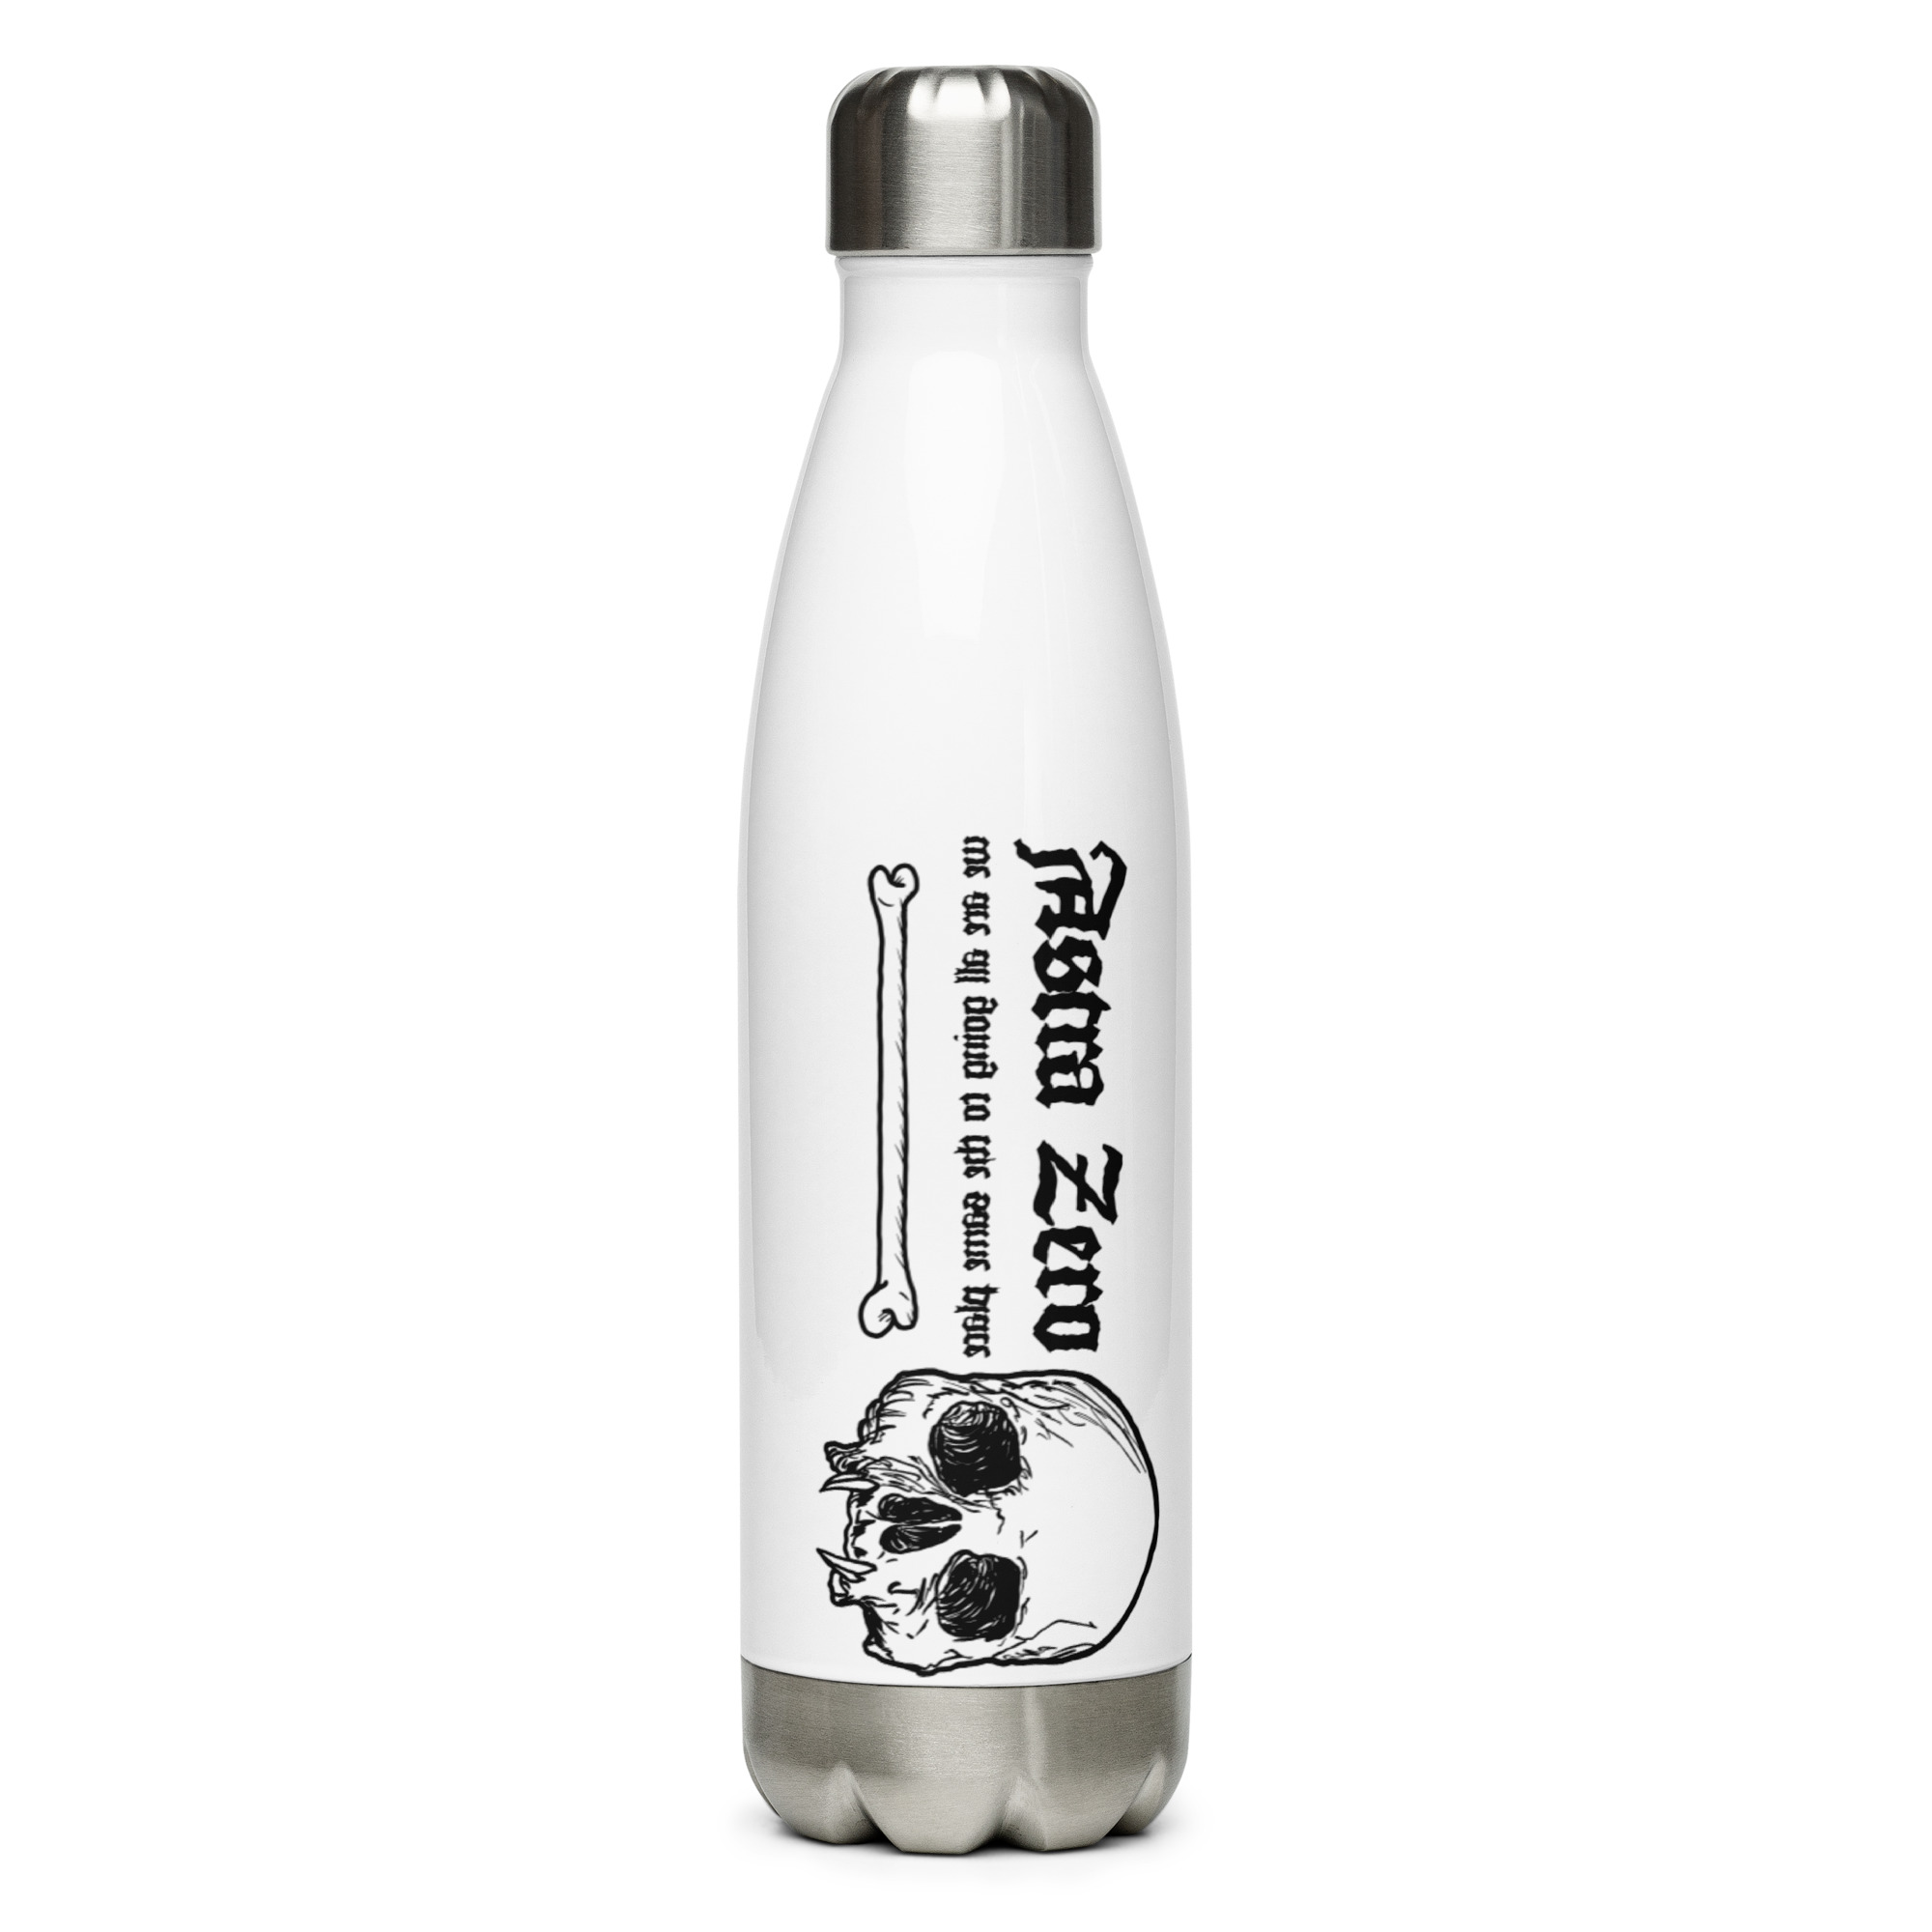 Featured image for “Going to the same place - White Stainless Steel Water Bottle”